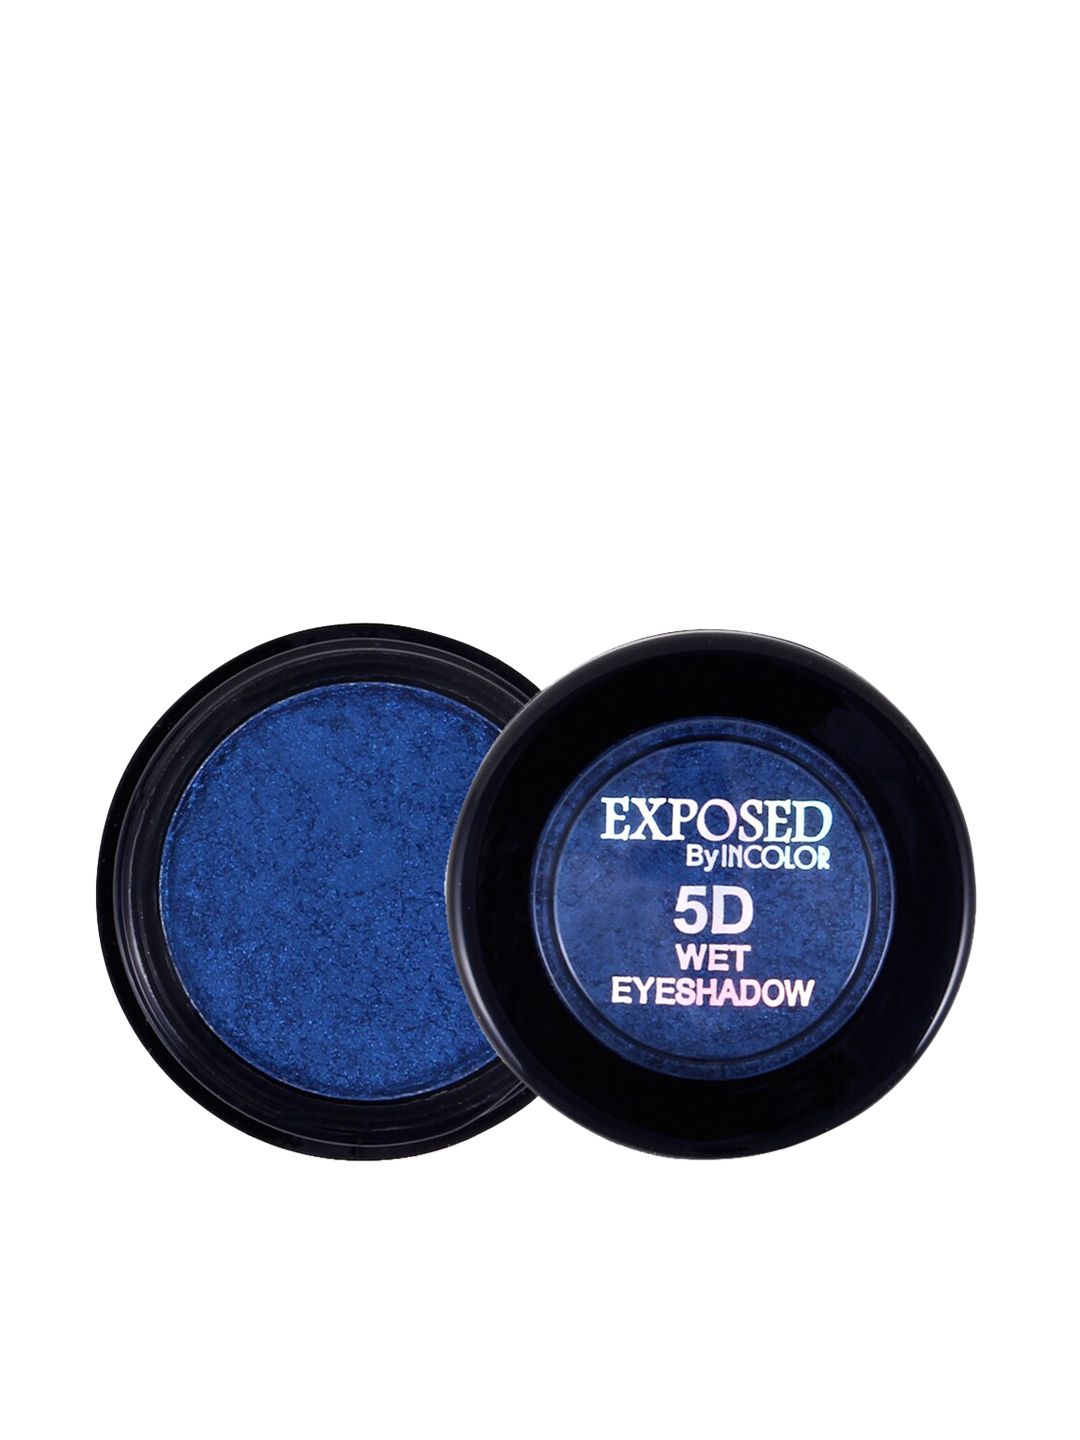 INCOLOR 5 D Wet Eyeshadow 22 4.5 gm Price in India